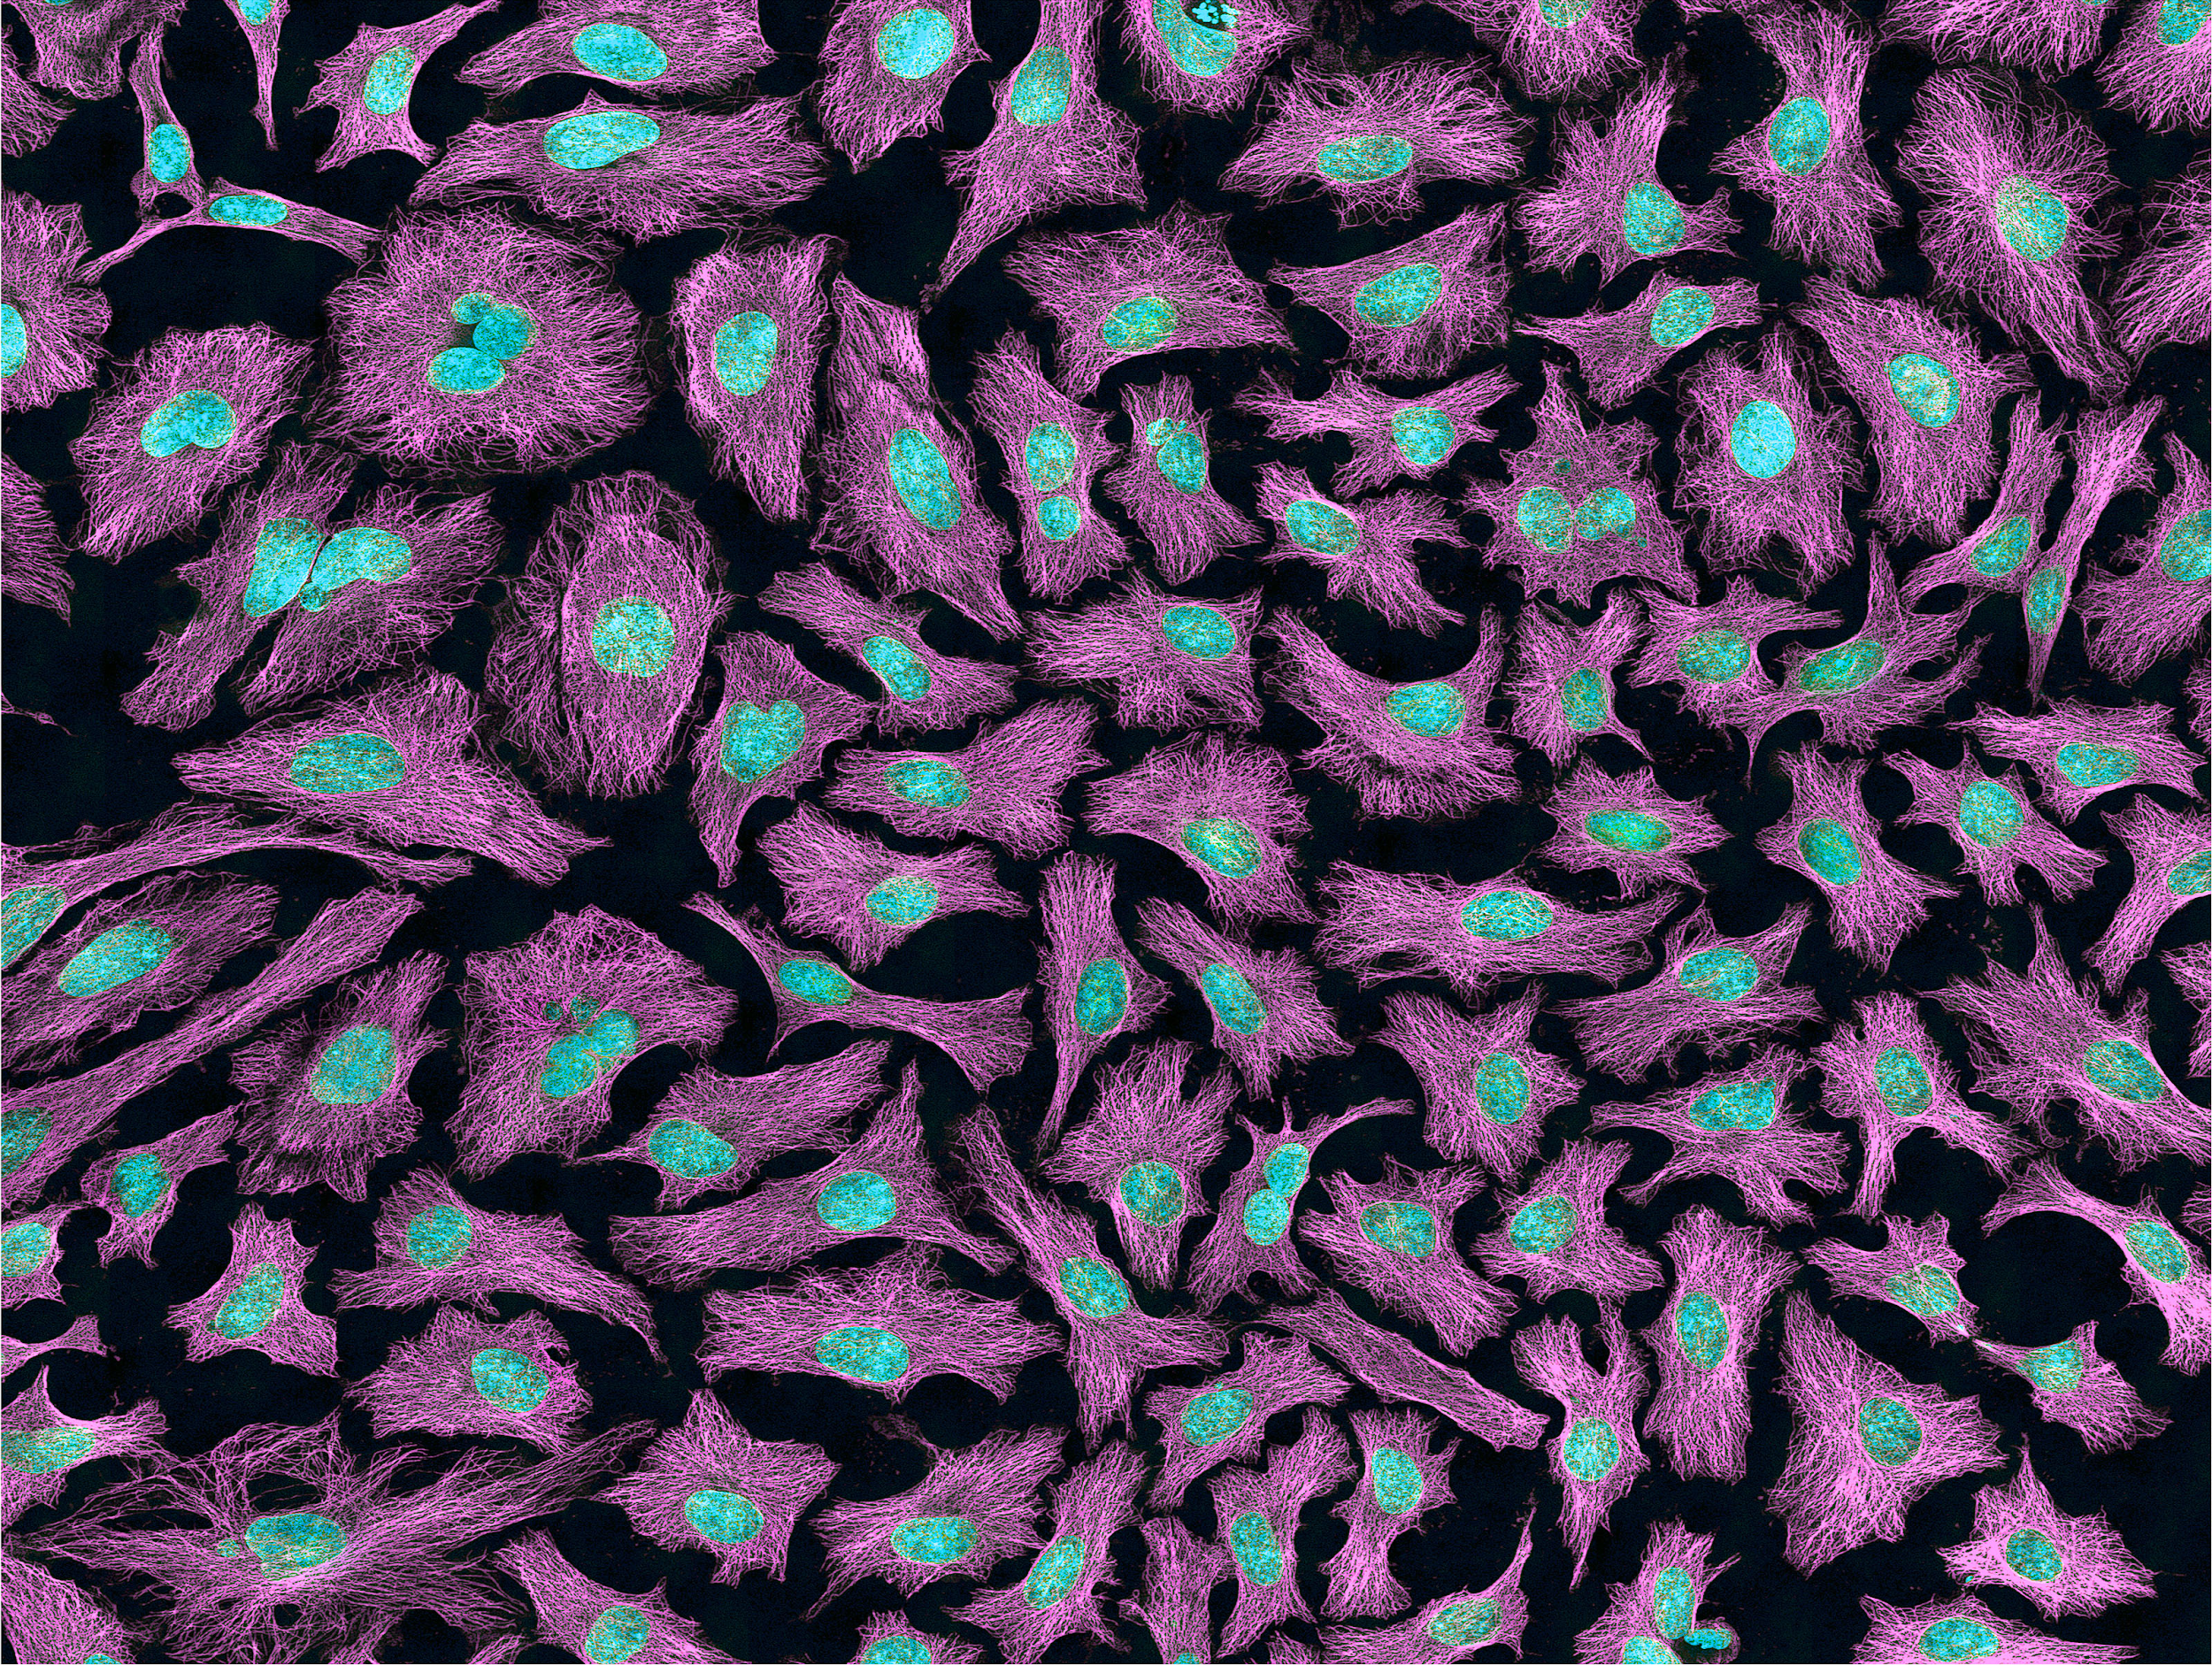 Microscope image of irregularly shaped cells with bright nuclei.